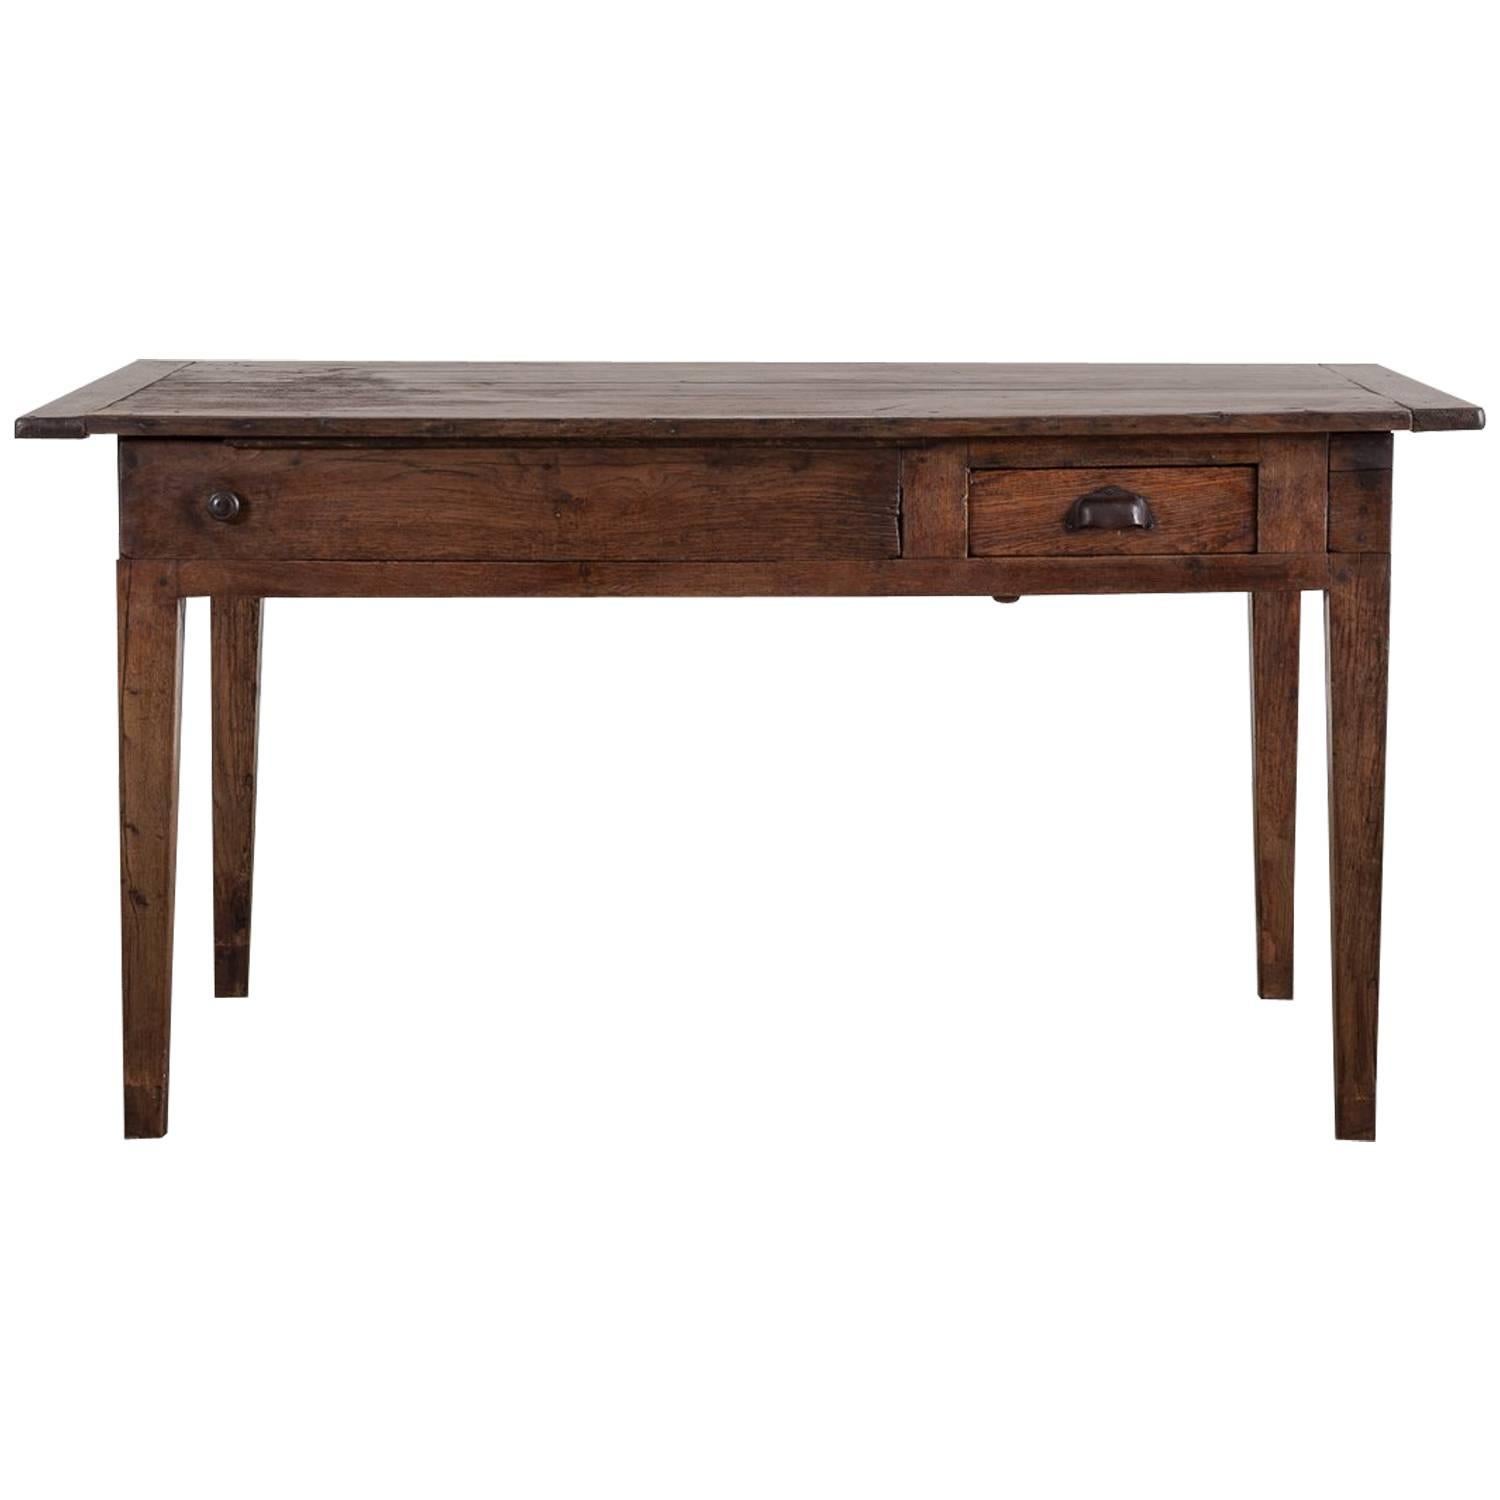 19th Century French Chestnut Table For Sale